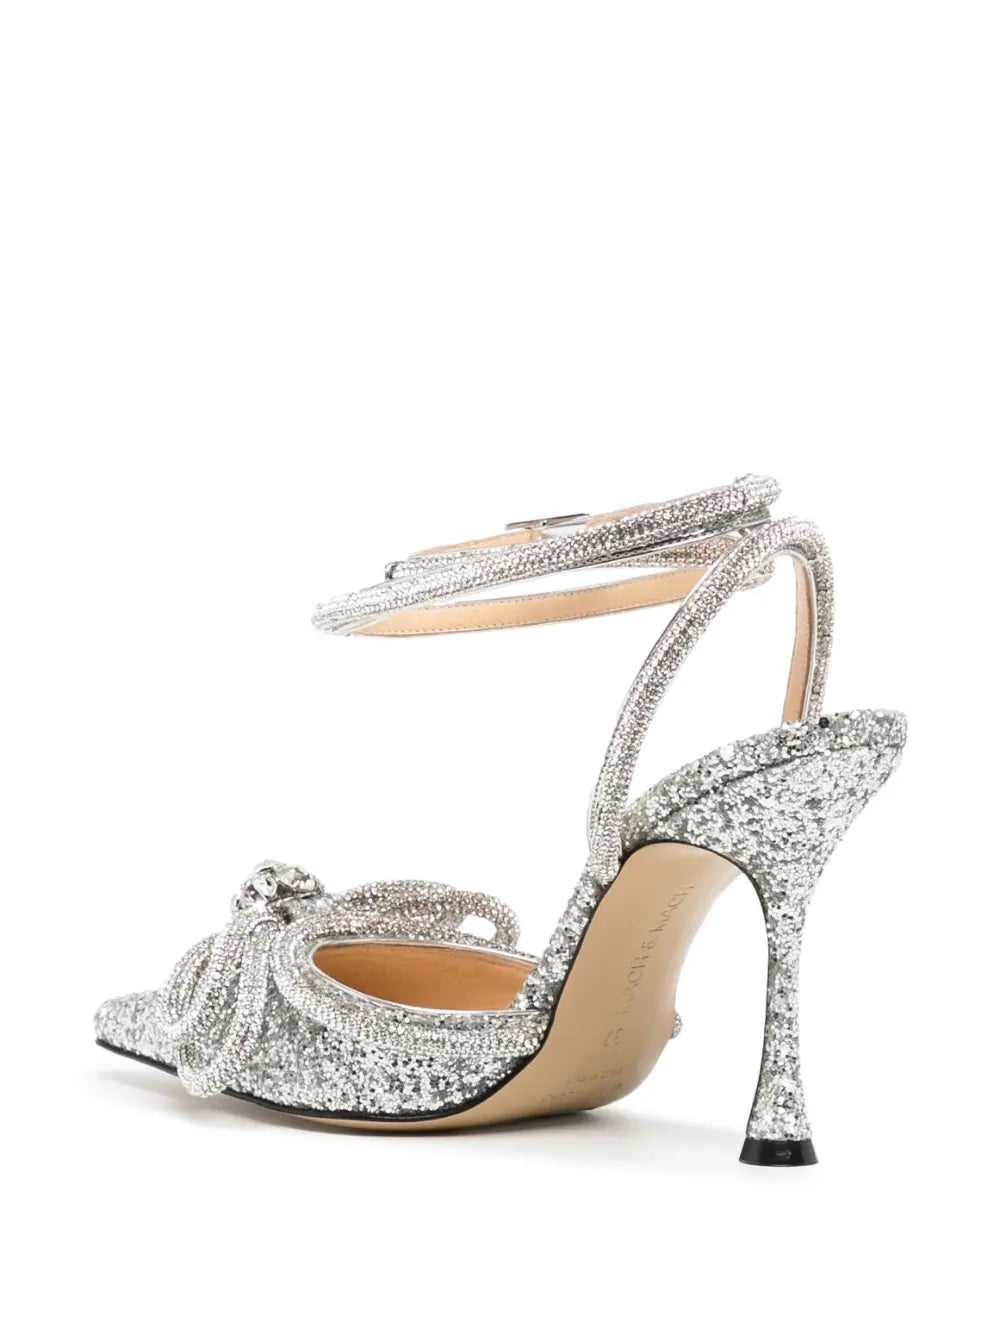 MACH &amp; MACH shoes for rent - with bow embellished with crystals, sequins and glitter